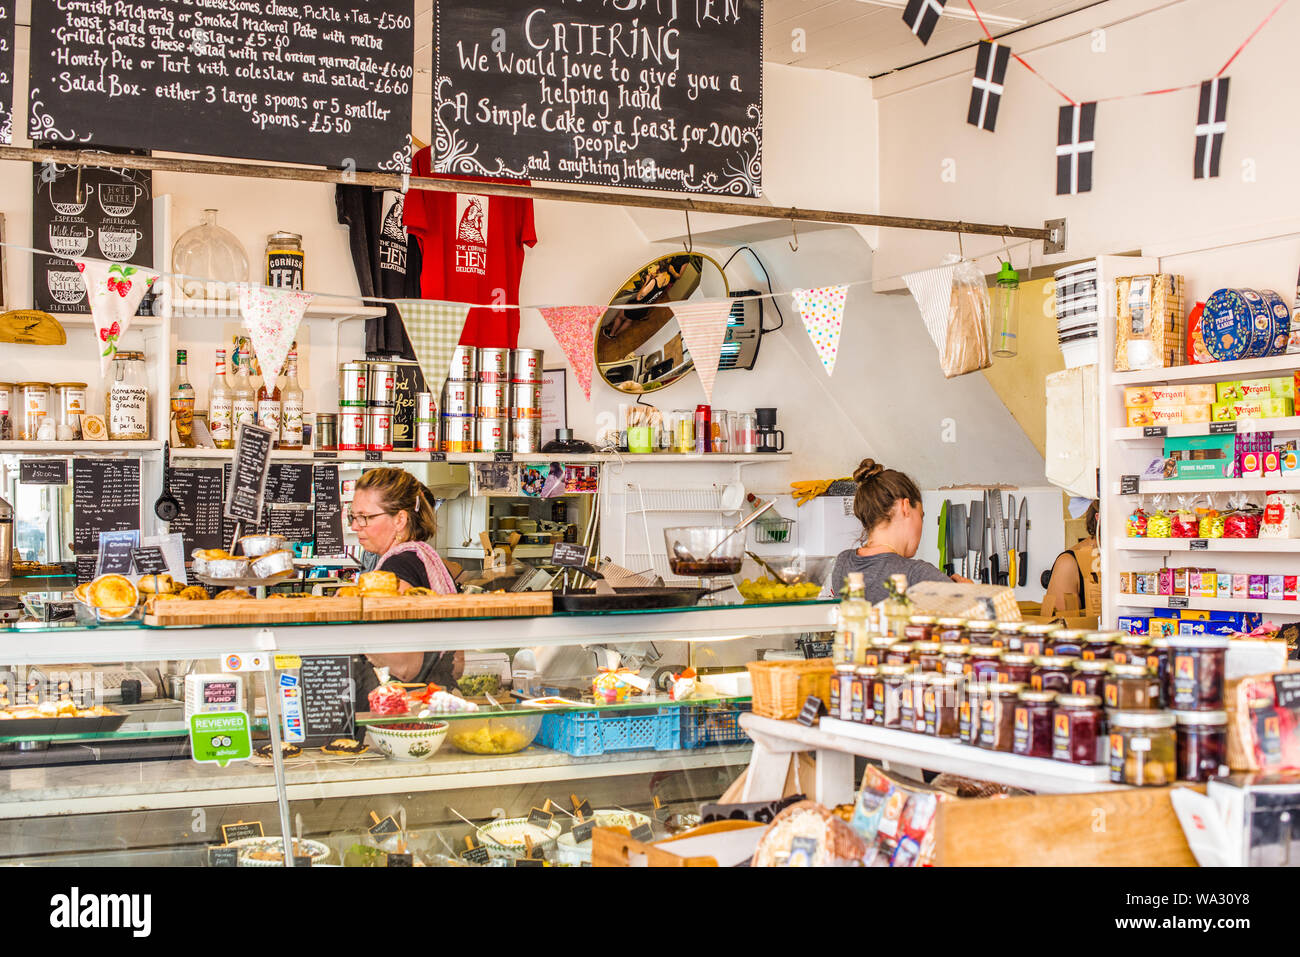 The Cornish Hen Deli in Market place in the heart of Penzance in West Cornwall, England, UK. Stock Photo